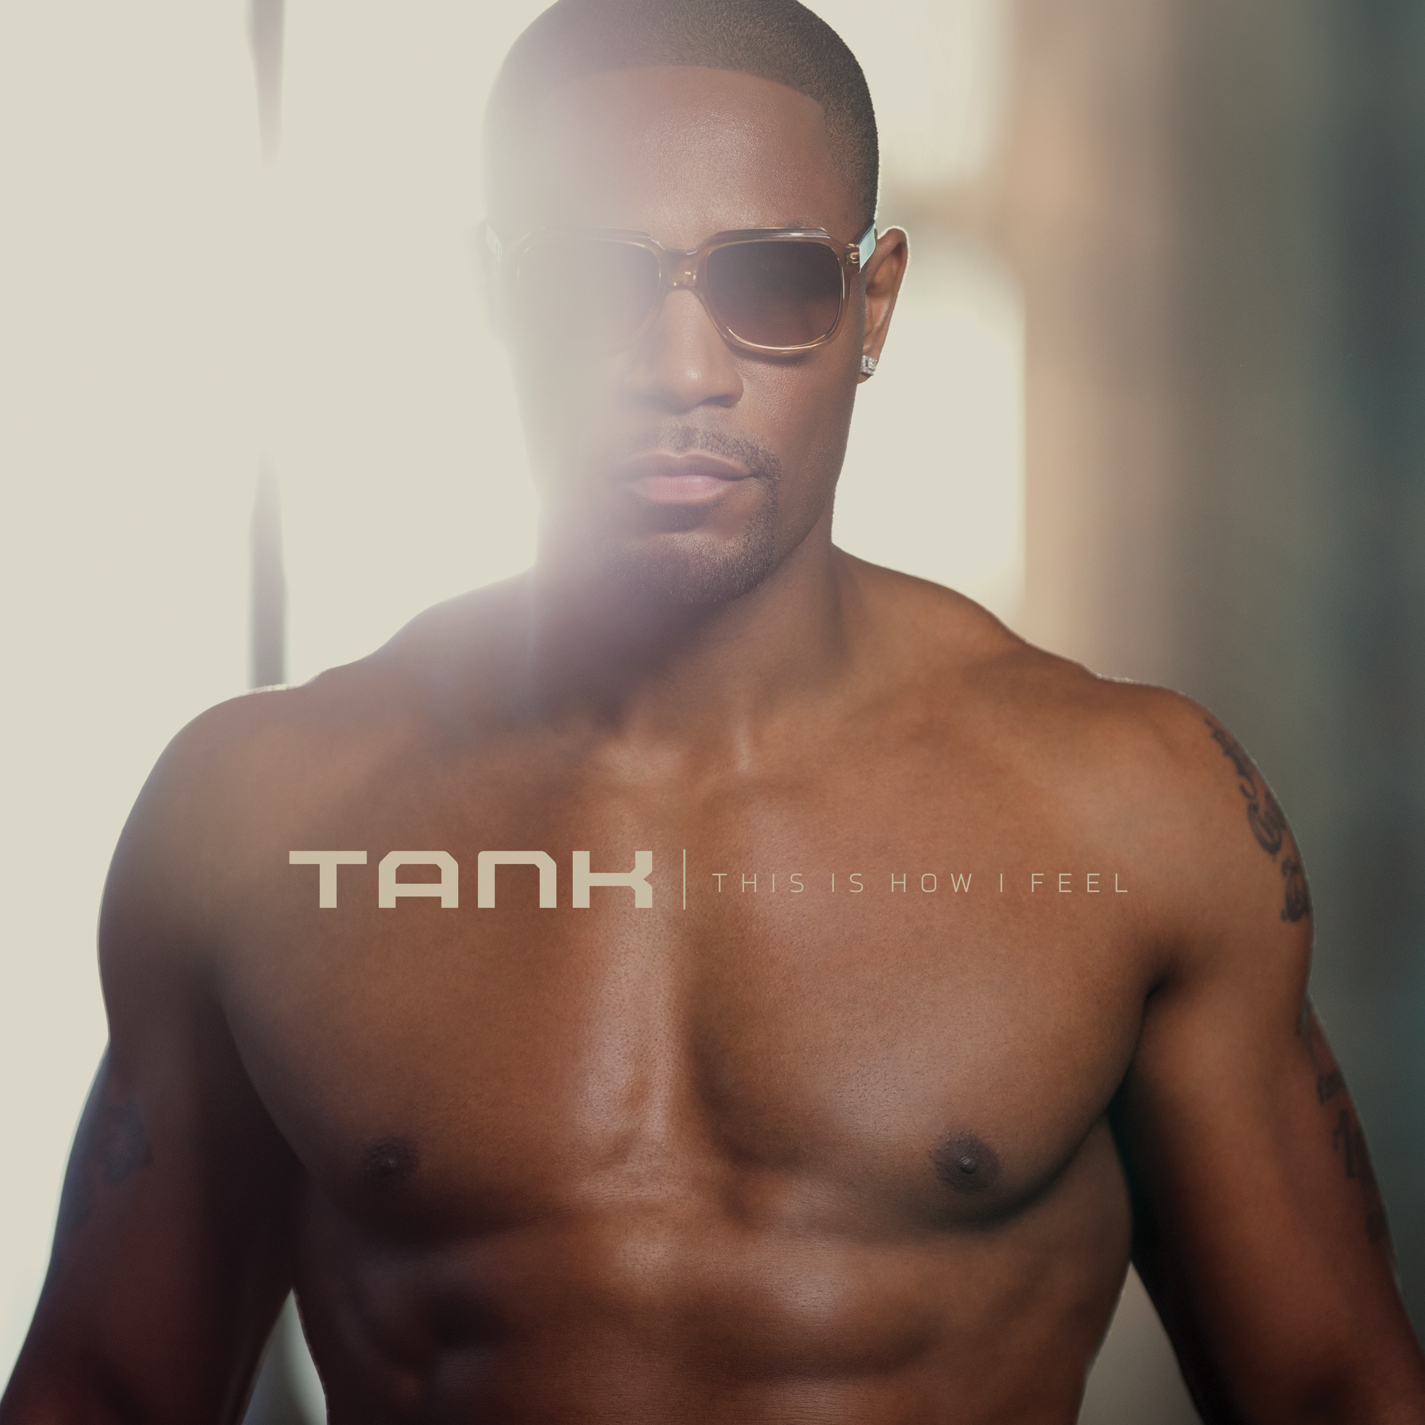 Tank "Compliments" Featuring T.I. & Kris Stephens